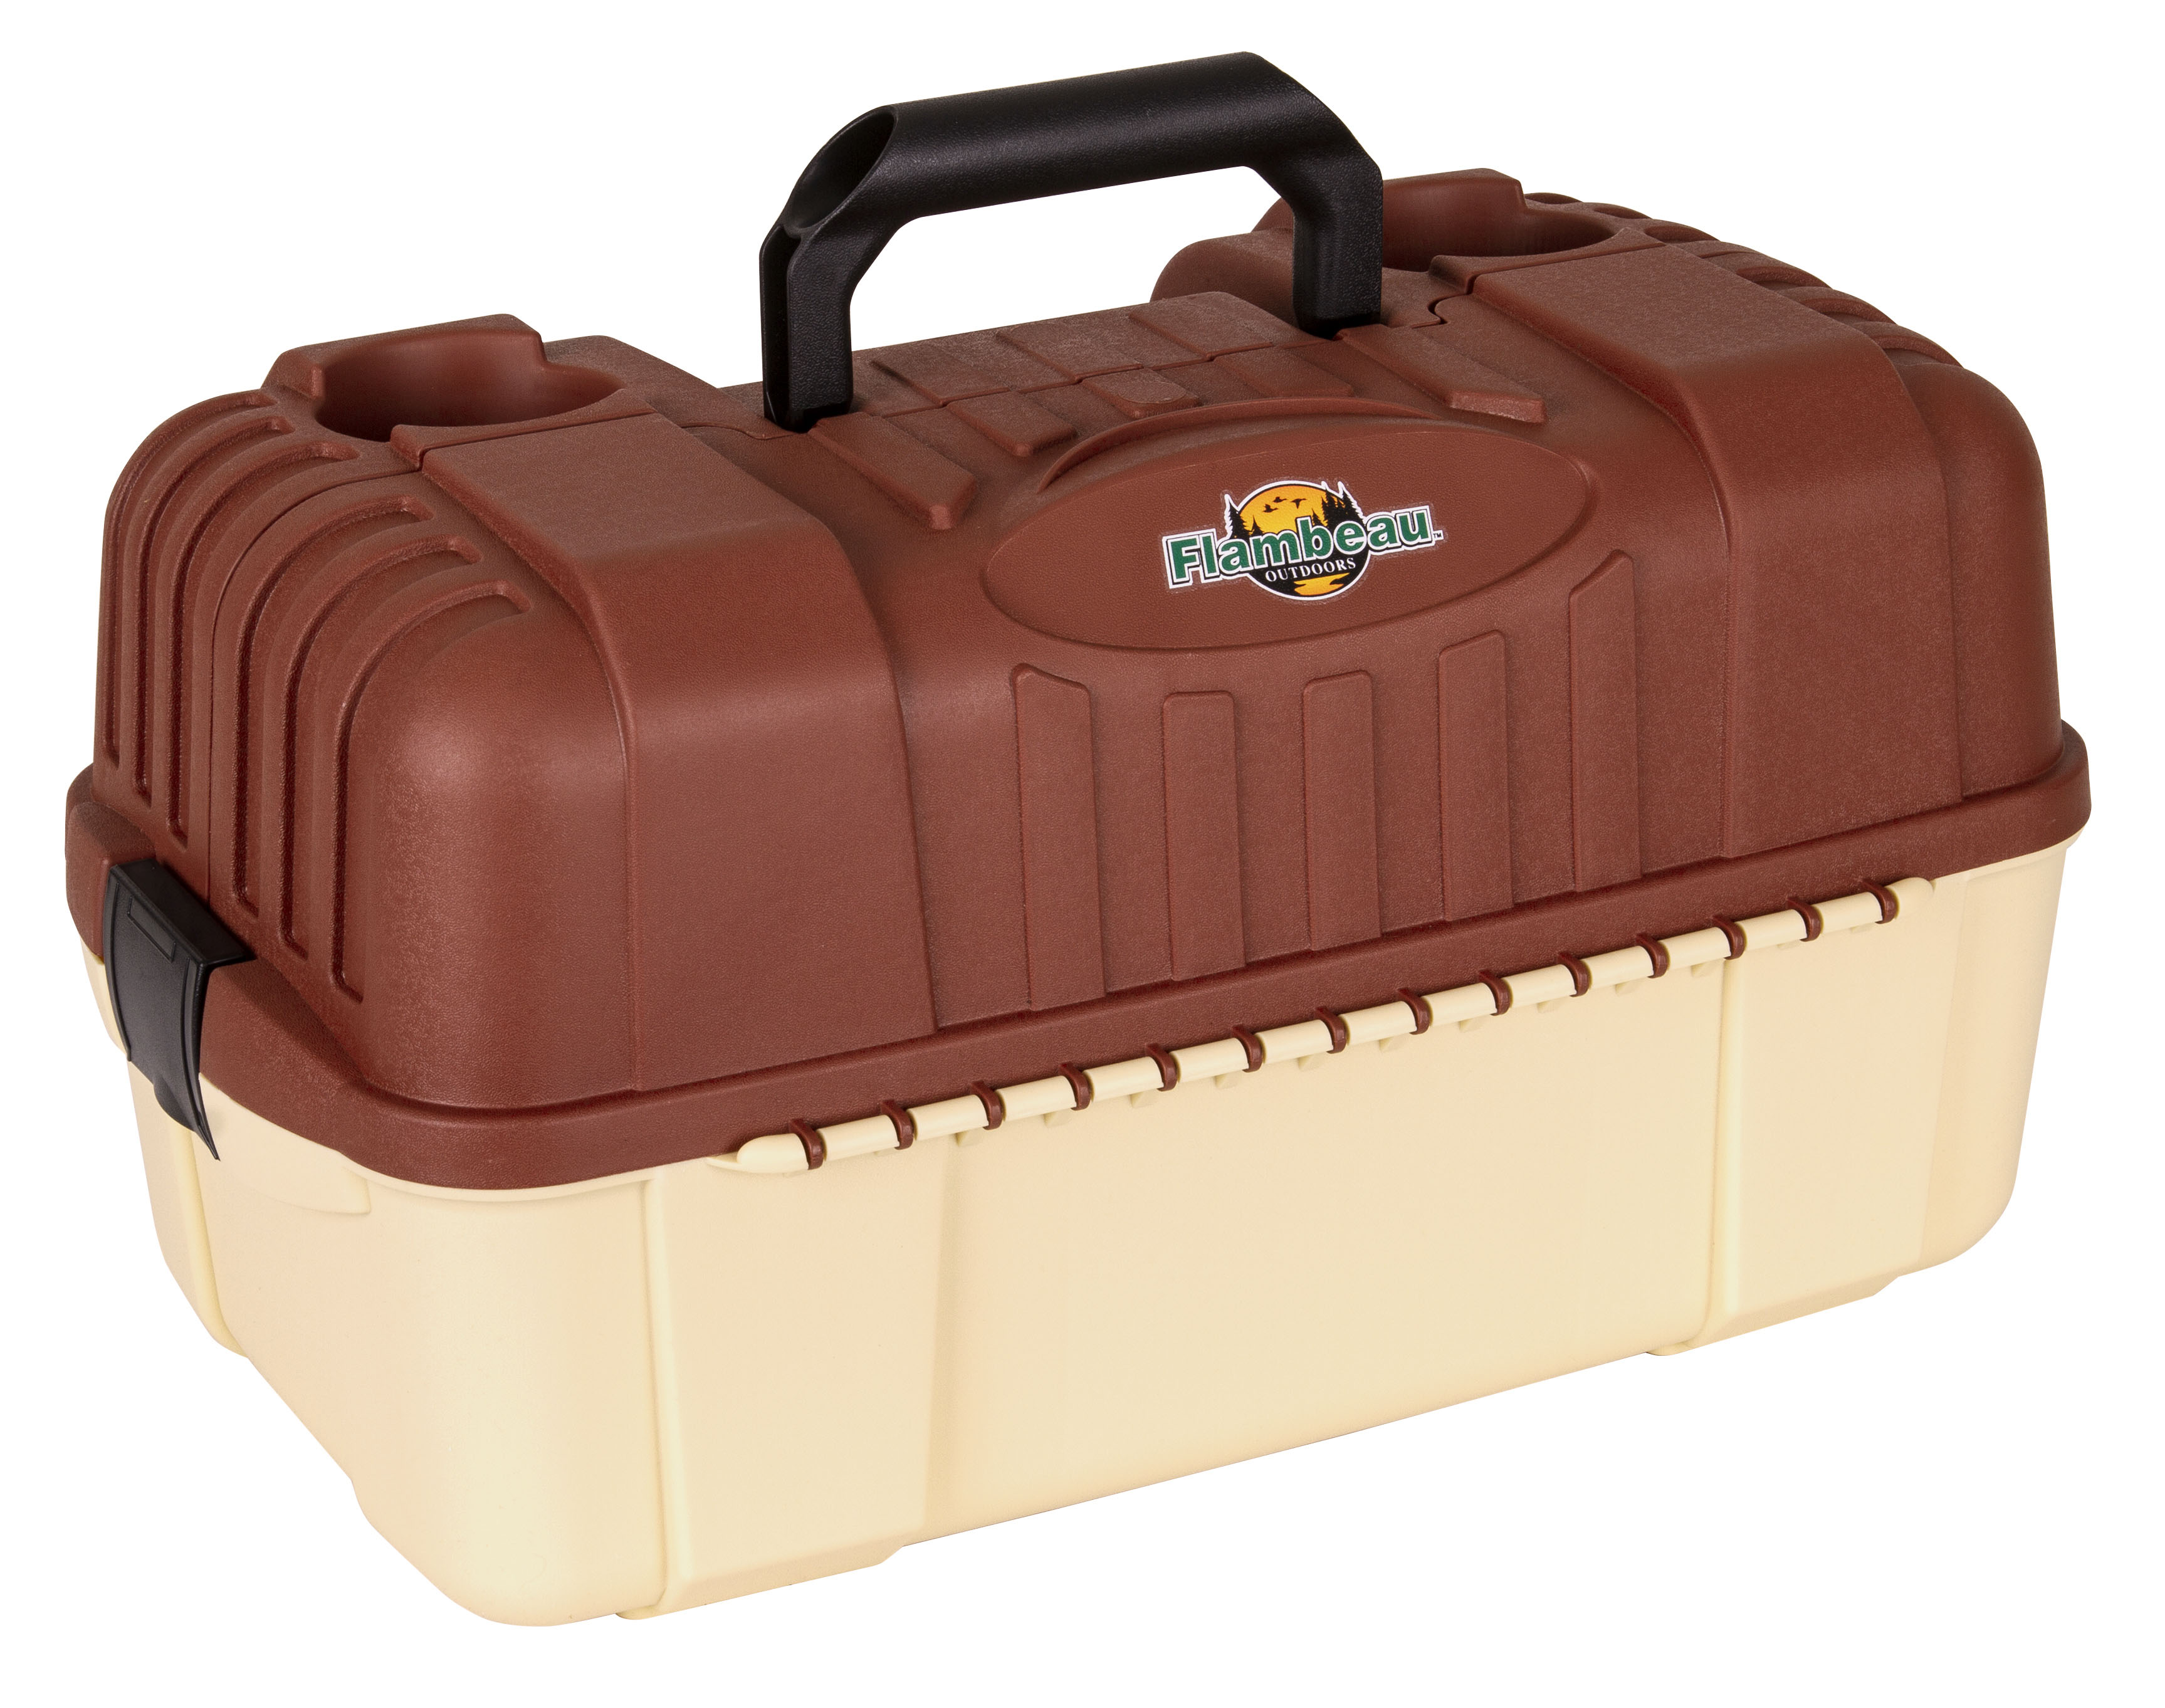 Flambeau Outdoors, 7 Tray Hip Roof Tackle Box, 20 inches long, Plastic, Beige - image 1 of 6